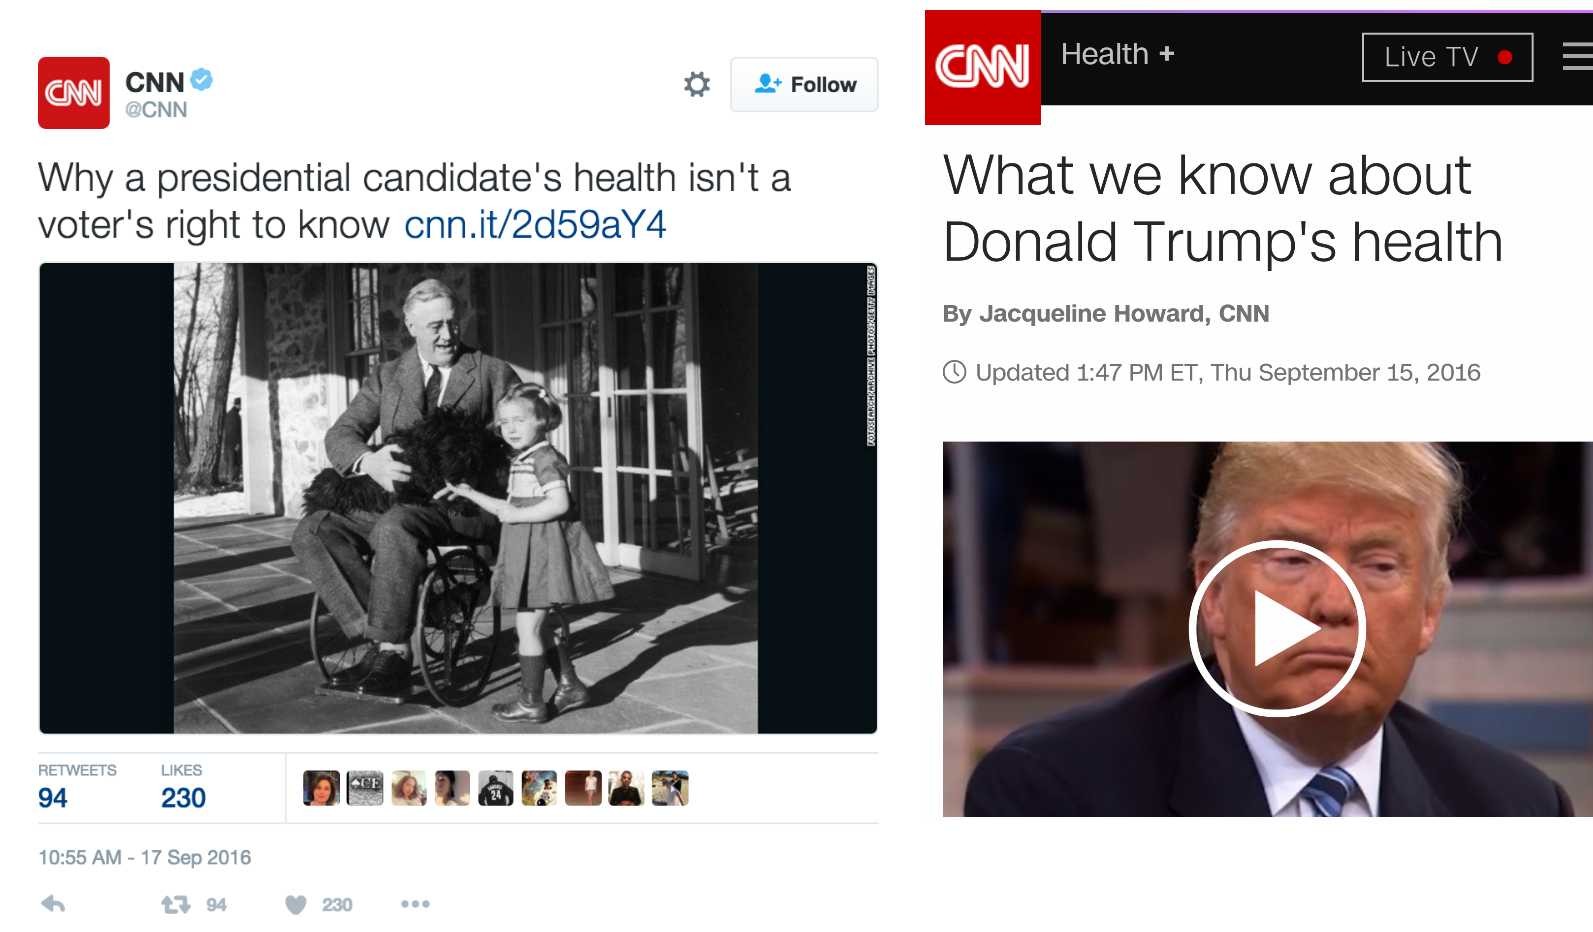 media hypocrisy examples - Cm Health Live Tv Cn Cnn Why a presidential candidate's health isn't a voter's right to know cnn.it2d59aY4 What we know about Donald Trump's health Rido By Jacqueline Howard, Cnn Dorohij Zmiabeterede Updated Et, Thu 230 94230 De